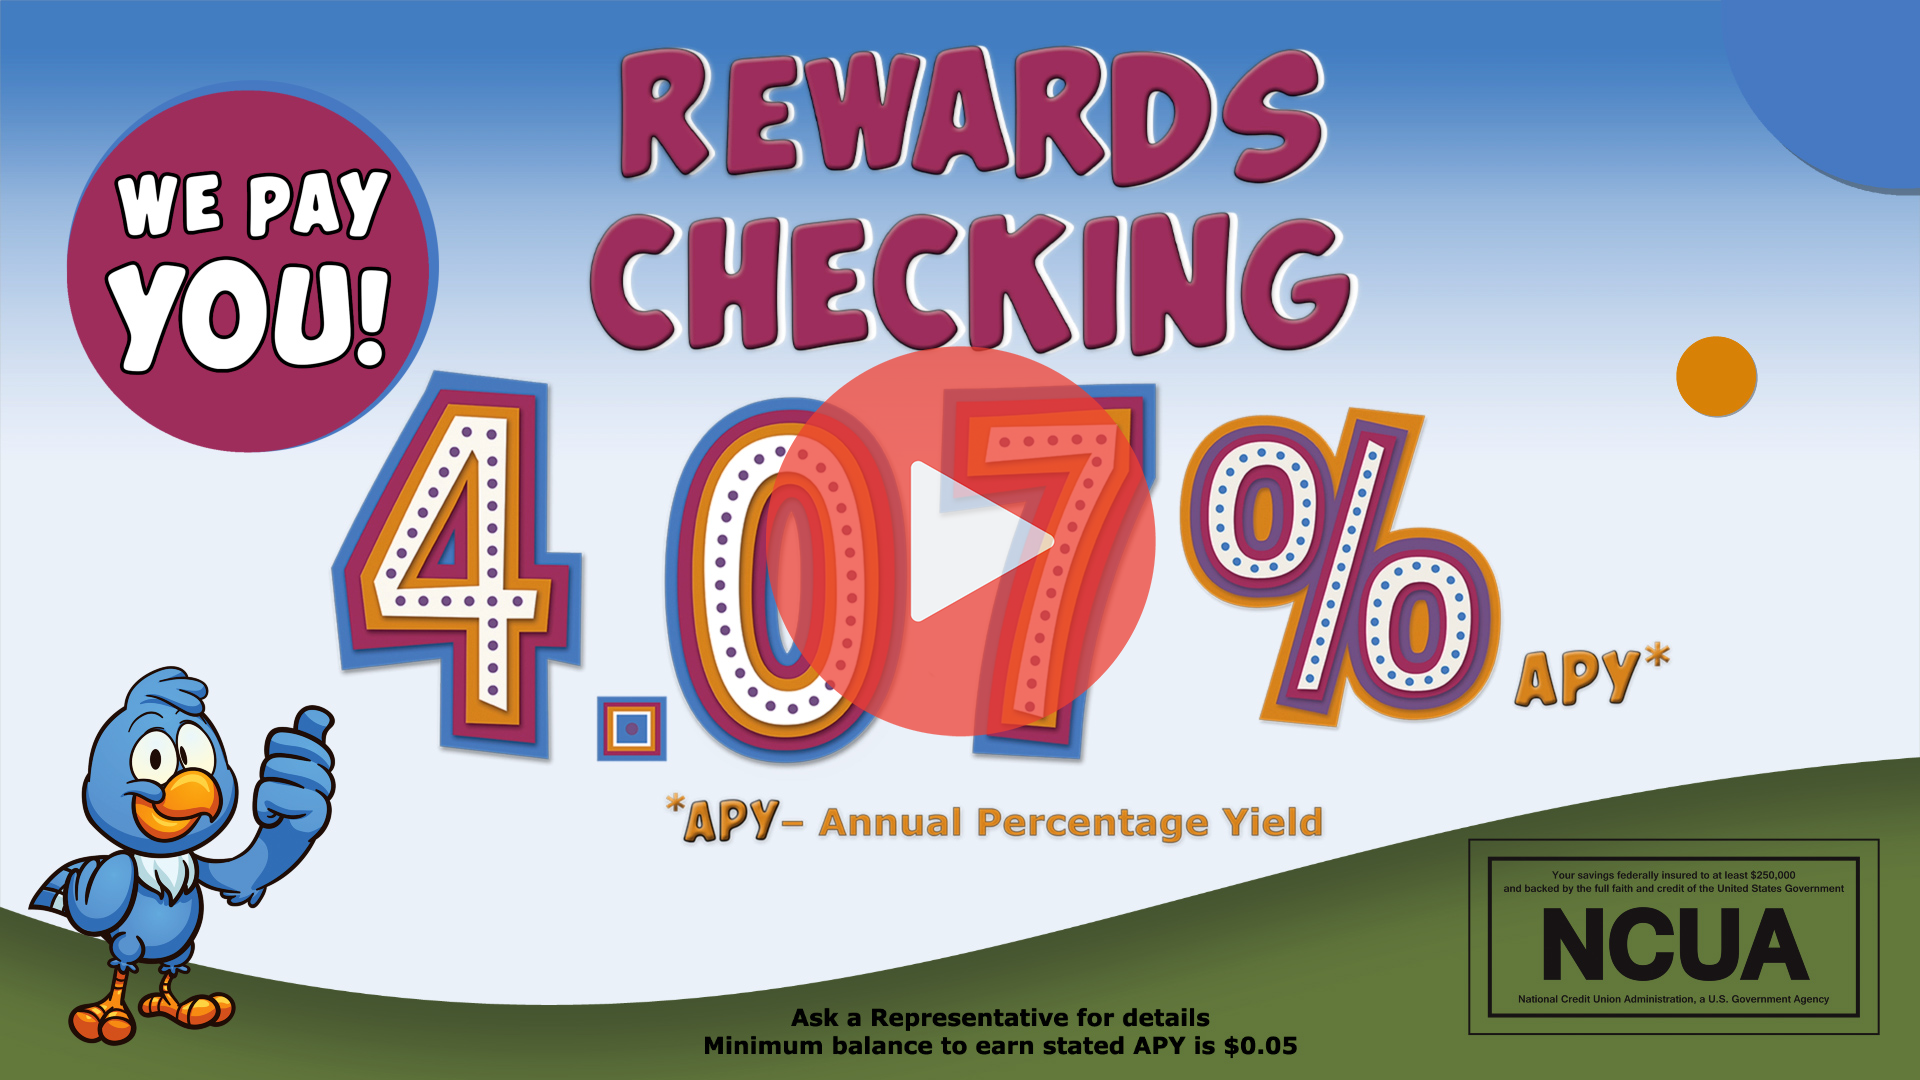 Rewards Checking! We pay you! 4.07% APY*. *APY– Annual Percentage Yield. Ask a Representative for details. Minimum balance to earn stated APY is 0.05